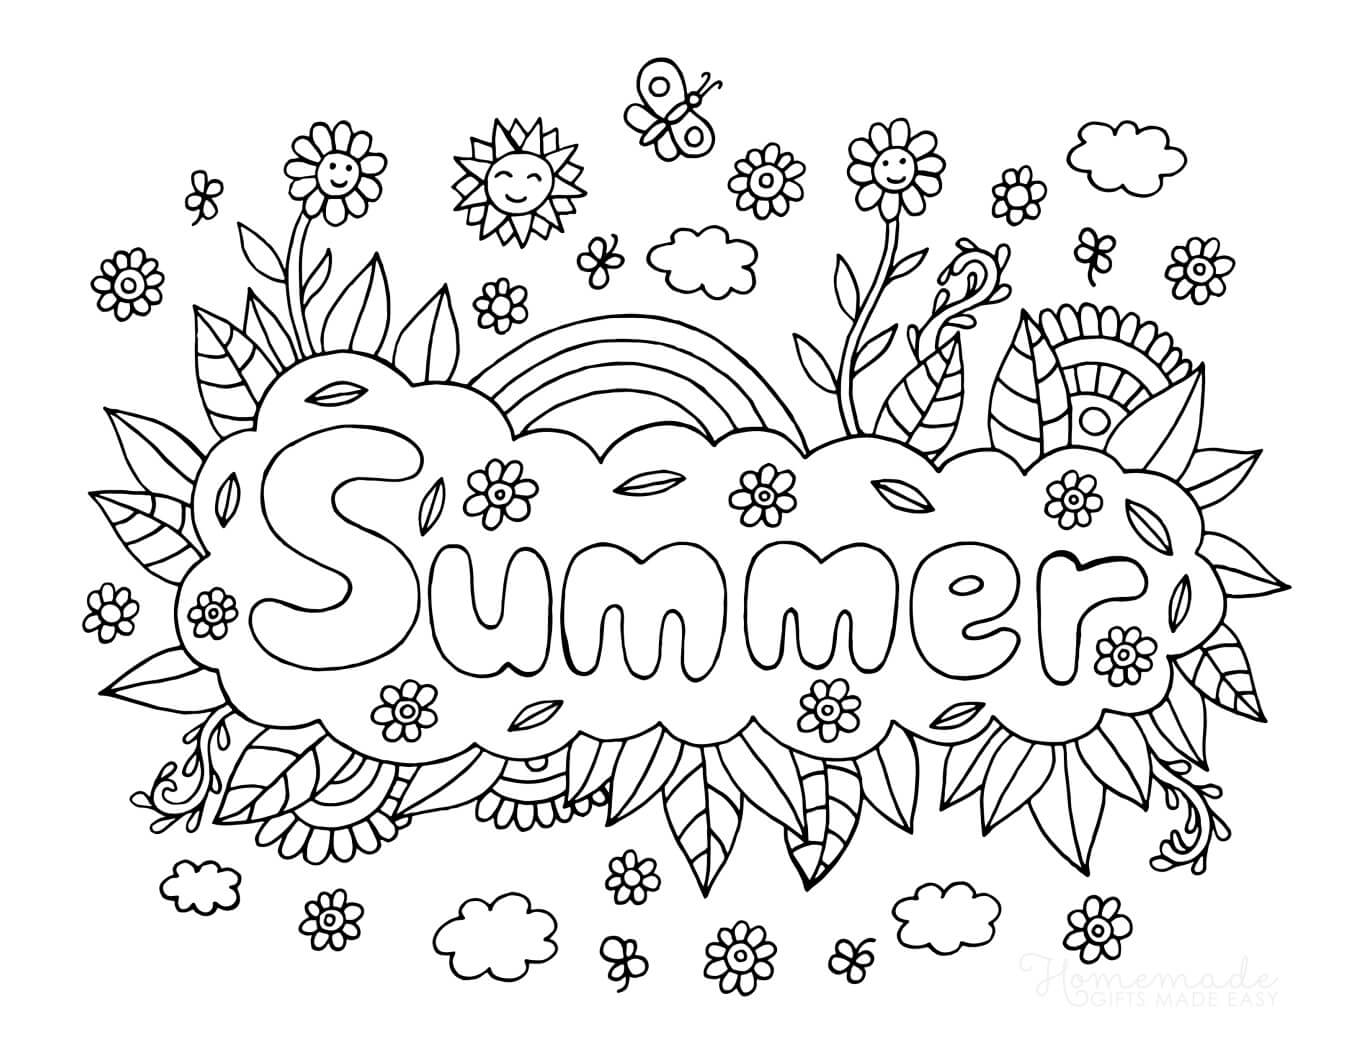 https://www.happierhuman.com/wp-content/uploads/2022/04/summer-coloring-pages-homemade-gifts-made-easy-summer-doodle-for-kids.jpg